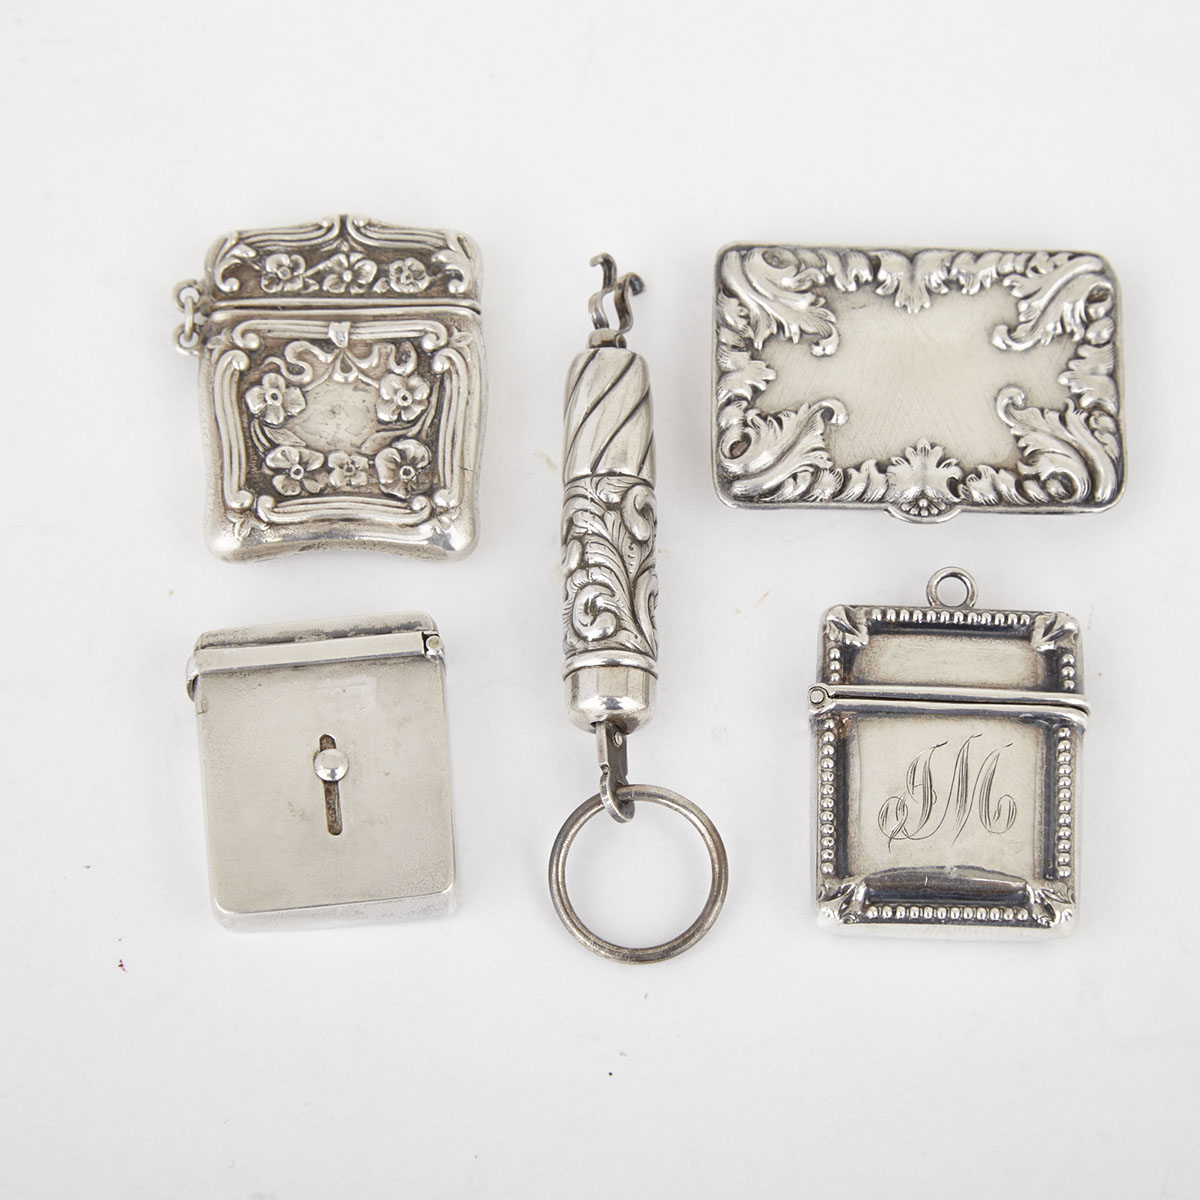 Four American Silver Stamp Cases and a Letter Scale, c.1900